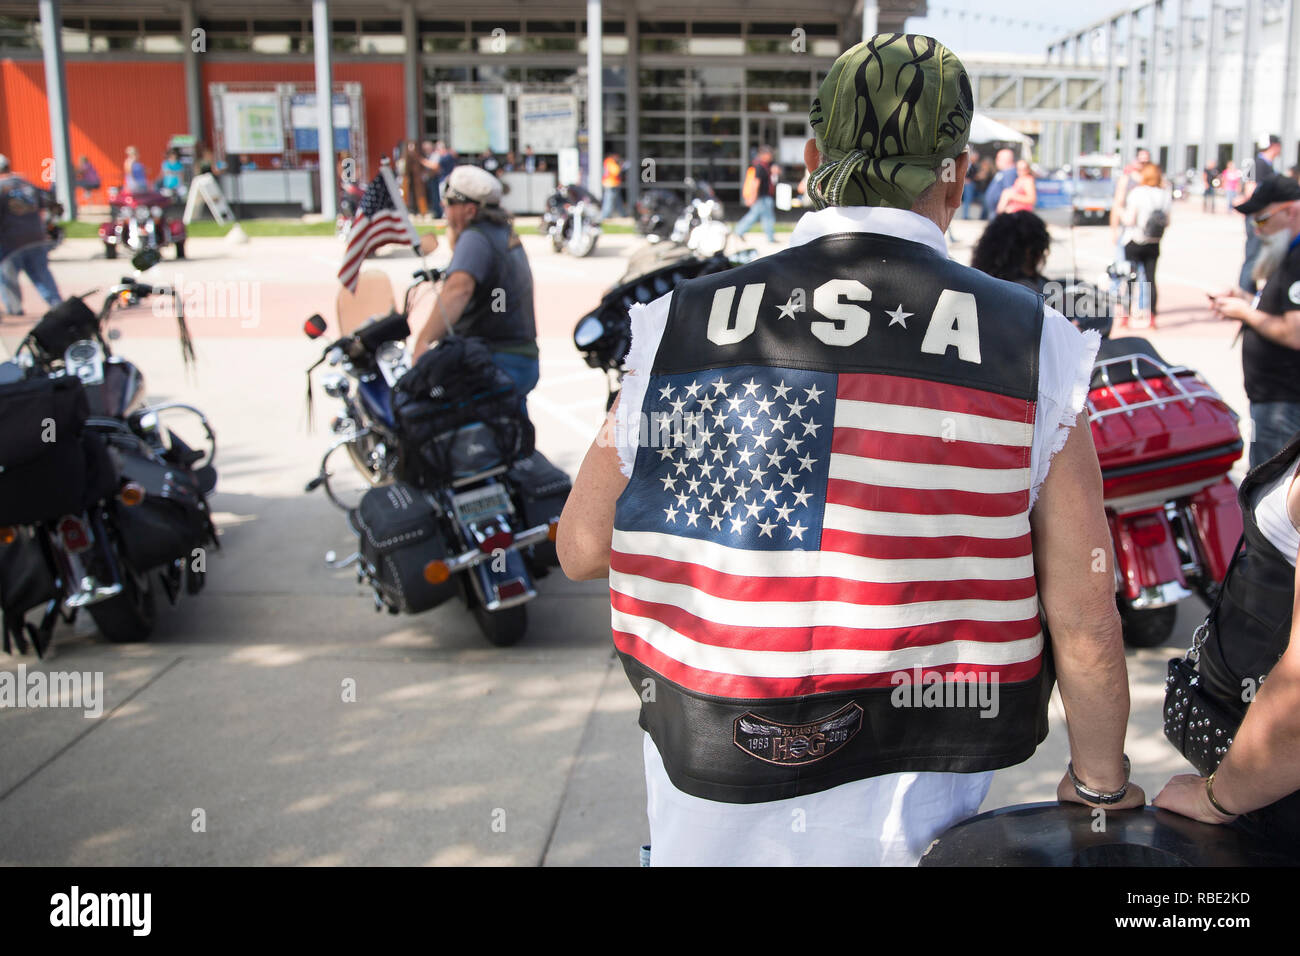 A motorcyclist with a USA vest attends the 115th Harley-Davidson anniversary event at the Harley-Davidson Museum in Milwaukee, Wisconsin Stock Photo